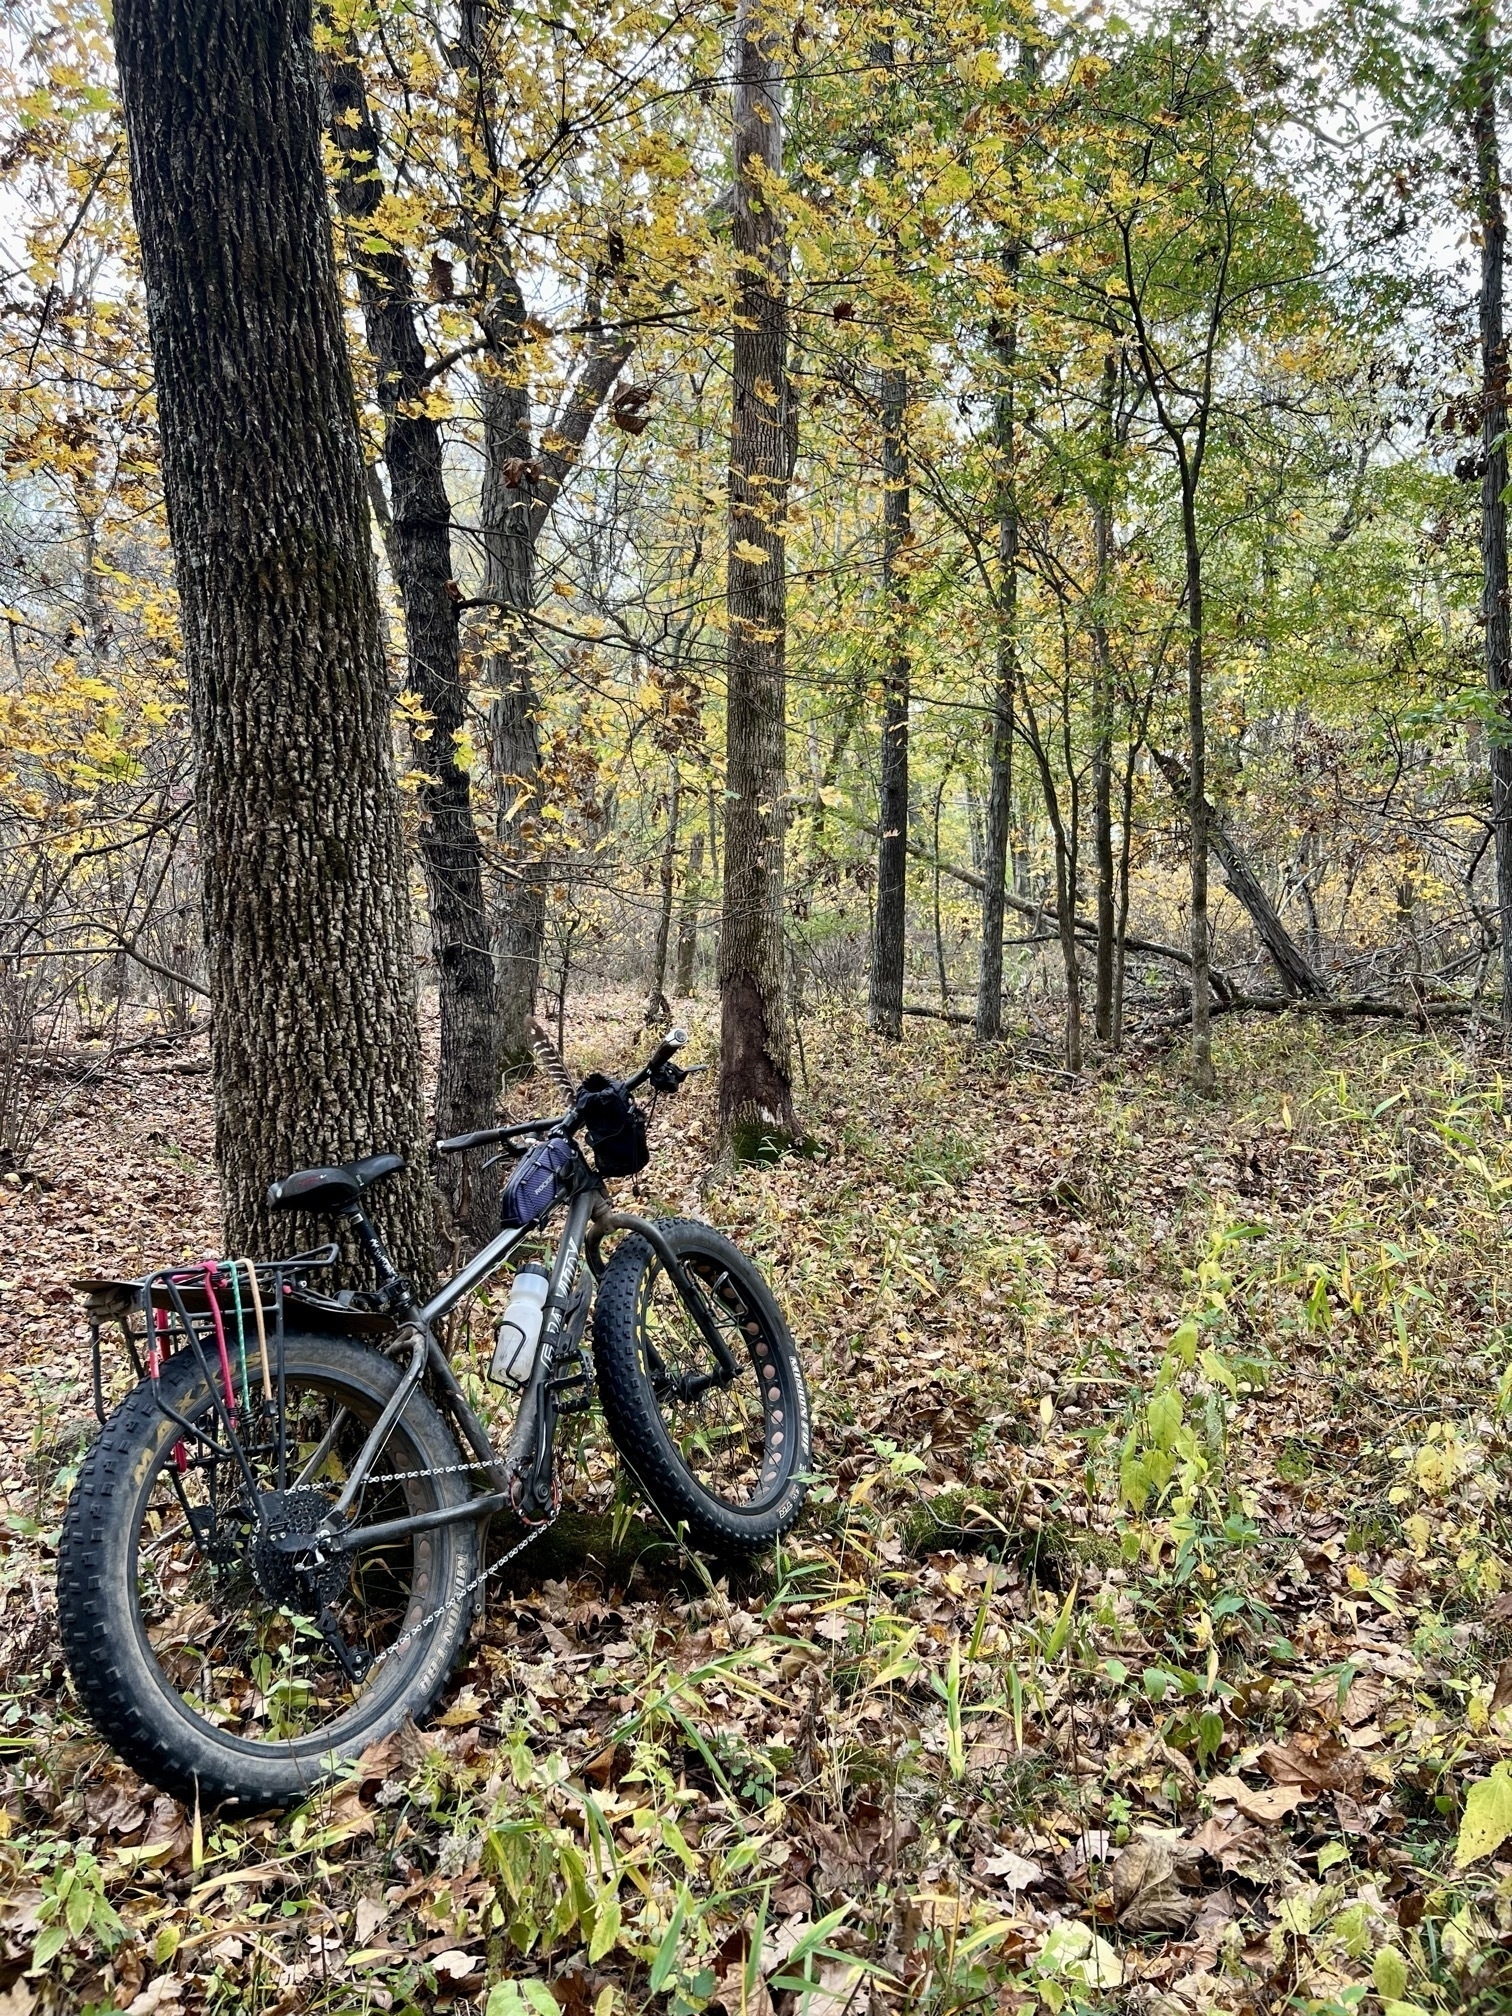 A fat tire bike leans against a tree in the woods. The leaves in the trees are a mix of green and yellow.